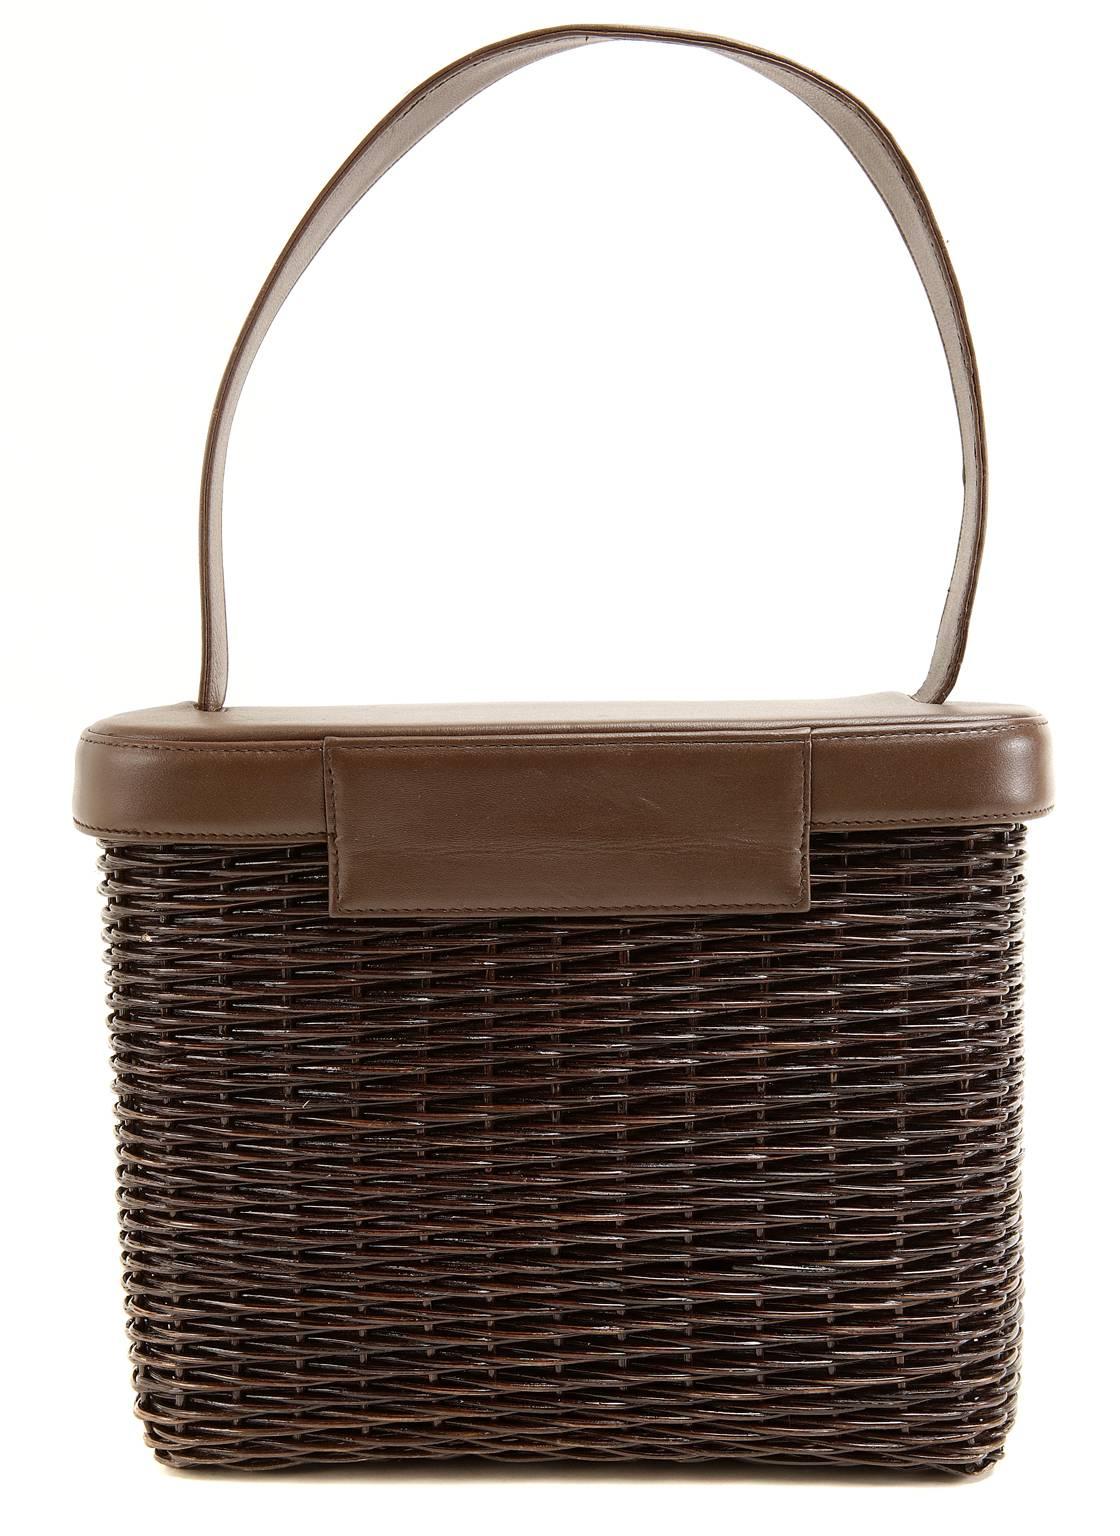 Chanel Brown Wicker Picnic Bag is in pristine condition.  The rarely seen style is a must have for collectors. 
 
Dark brown woven wicker is combined with milk chocolate leather in this whimsically styled purse constructed like a picnic basket. 